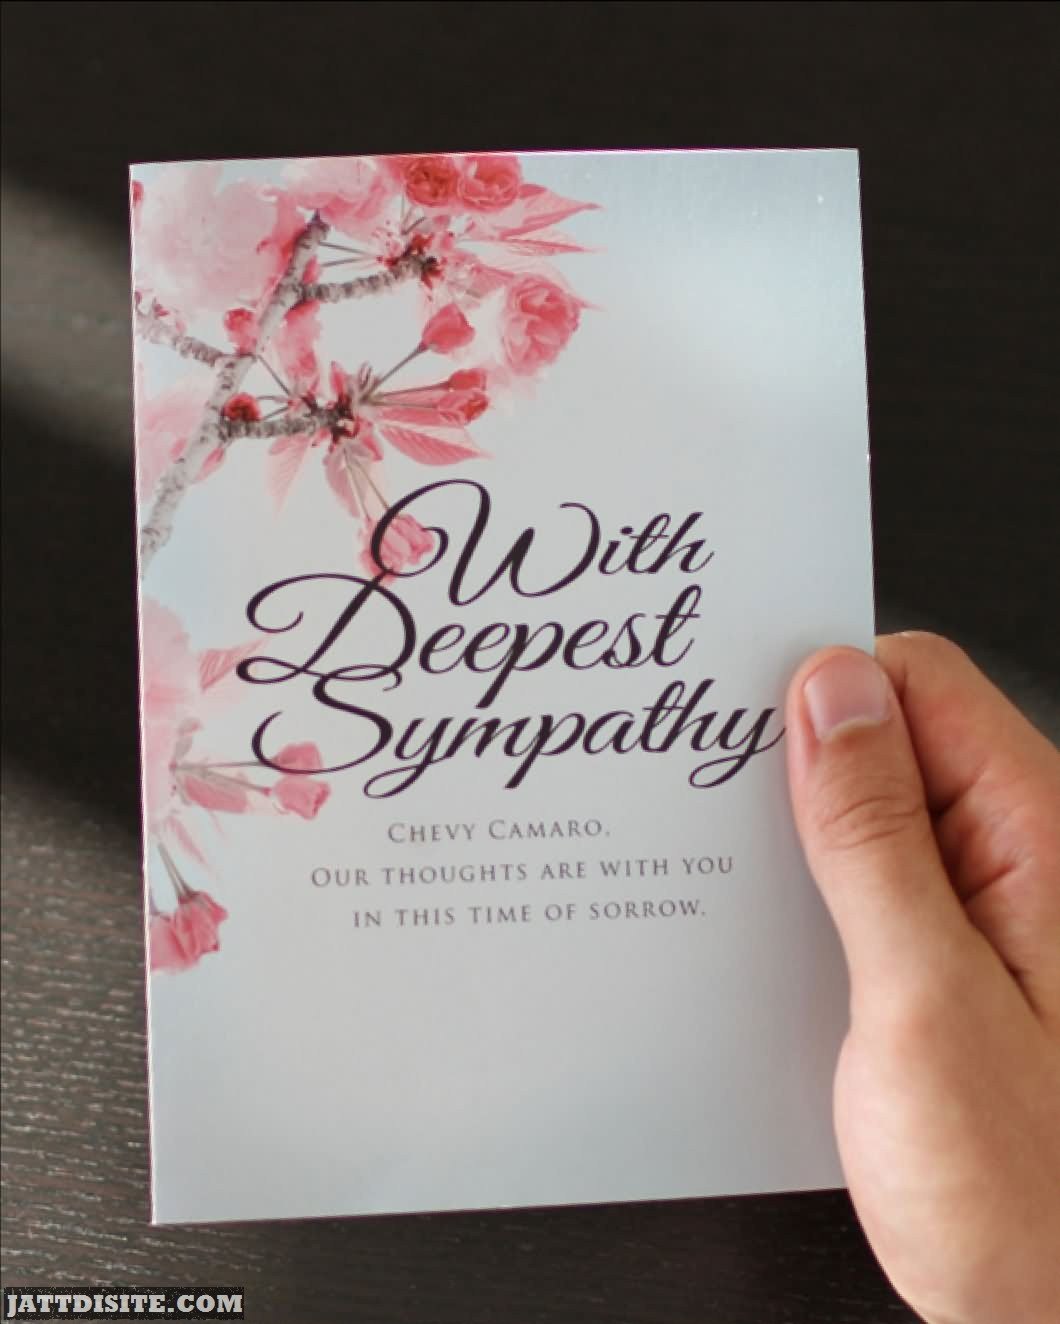 With Deepest Sympathy Card For You - JattDiSite.com